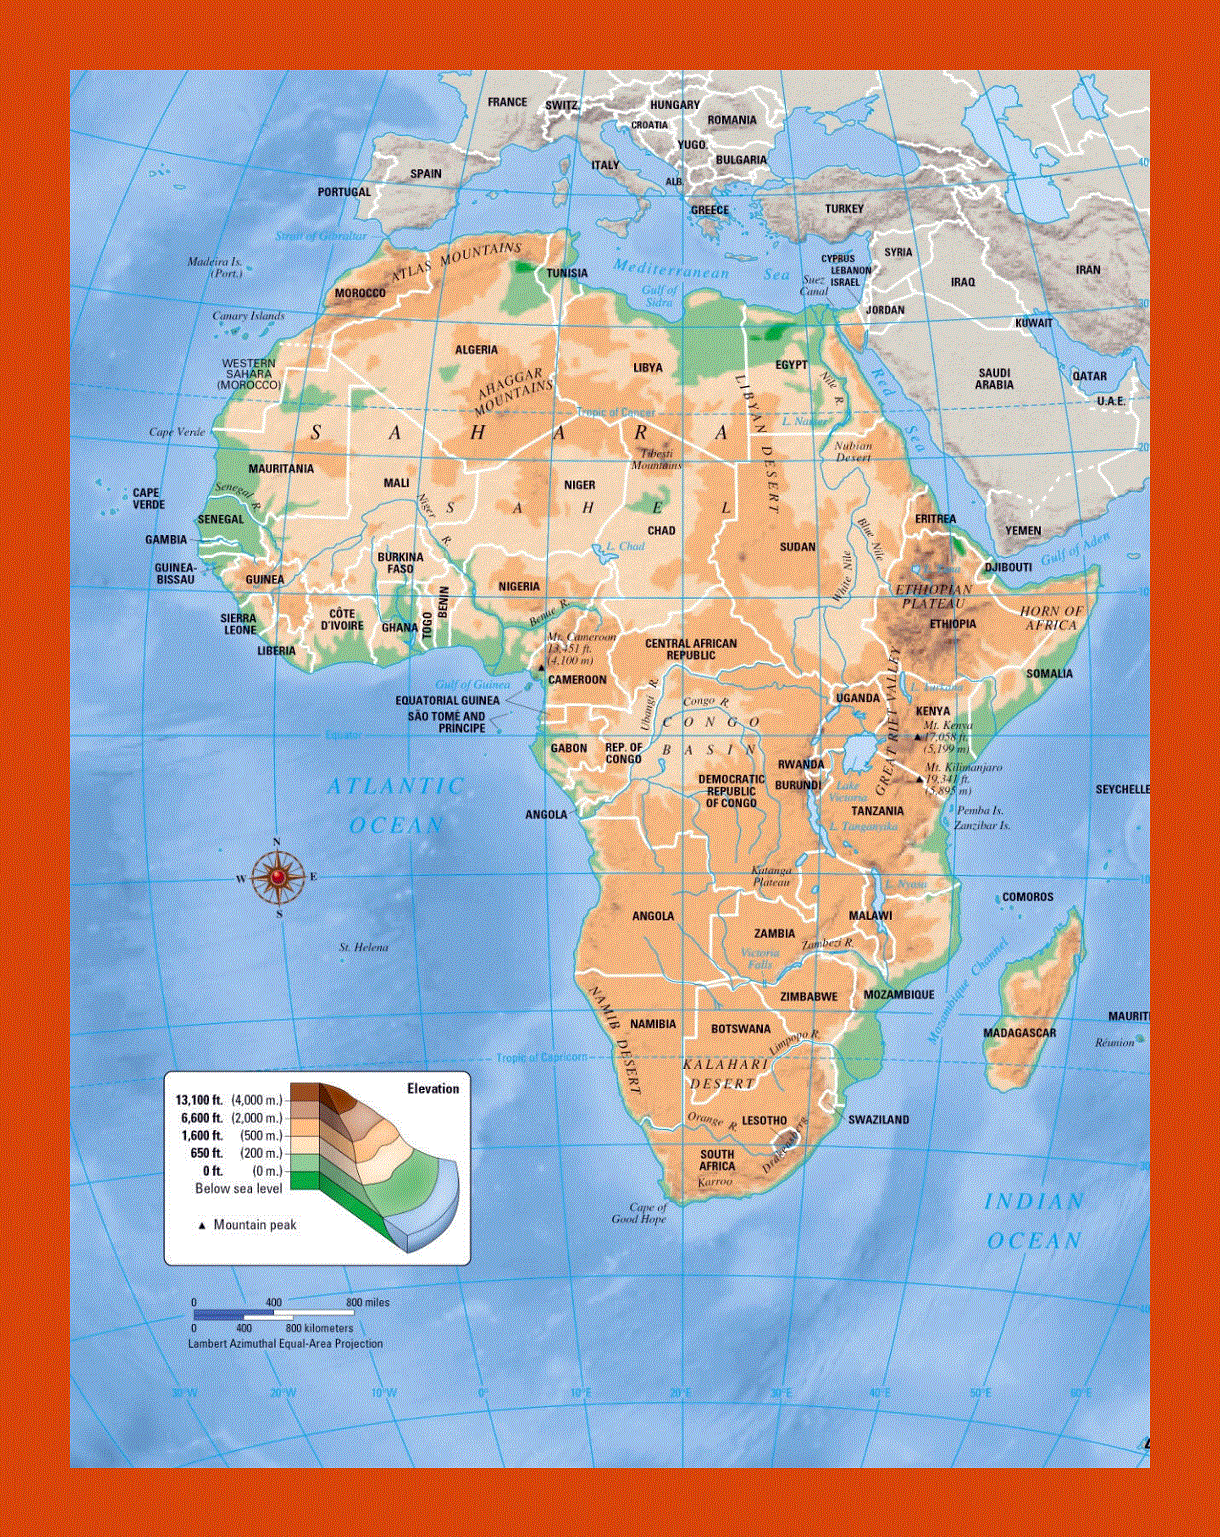 Elevation map of Africa